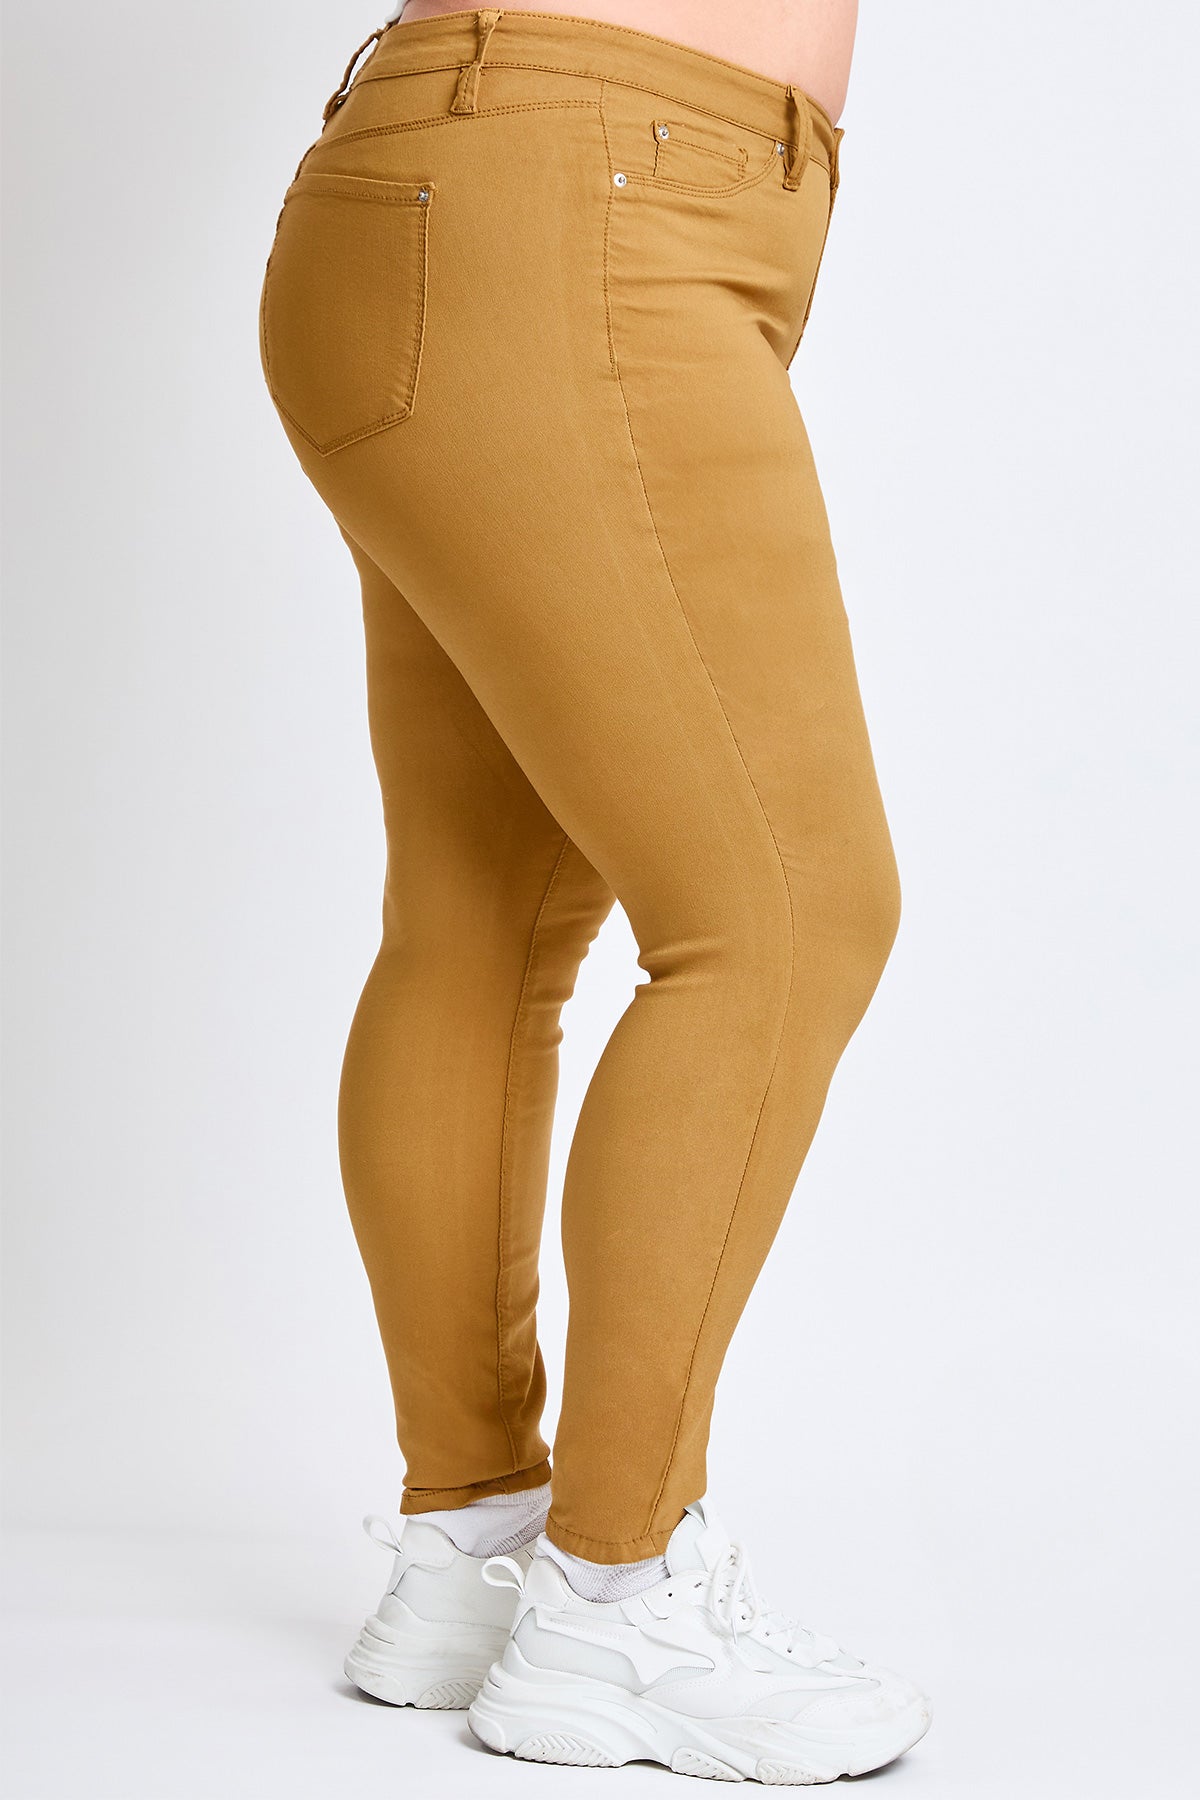 Plus Size Women's Hyperstretch Forever Color Skinny Pants - Warm Tones